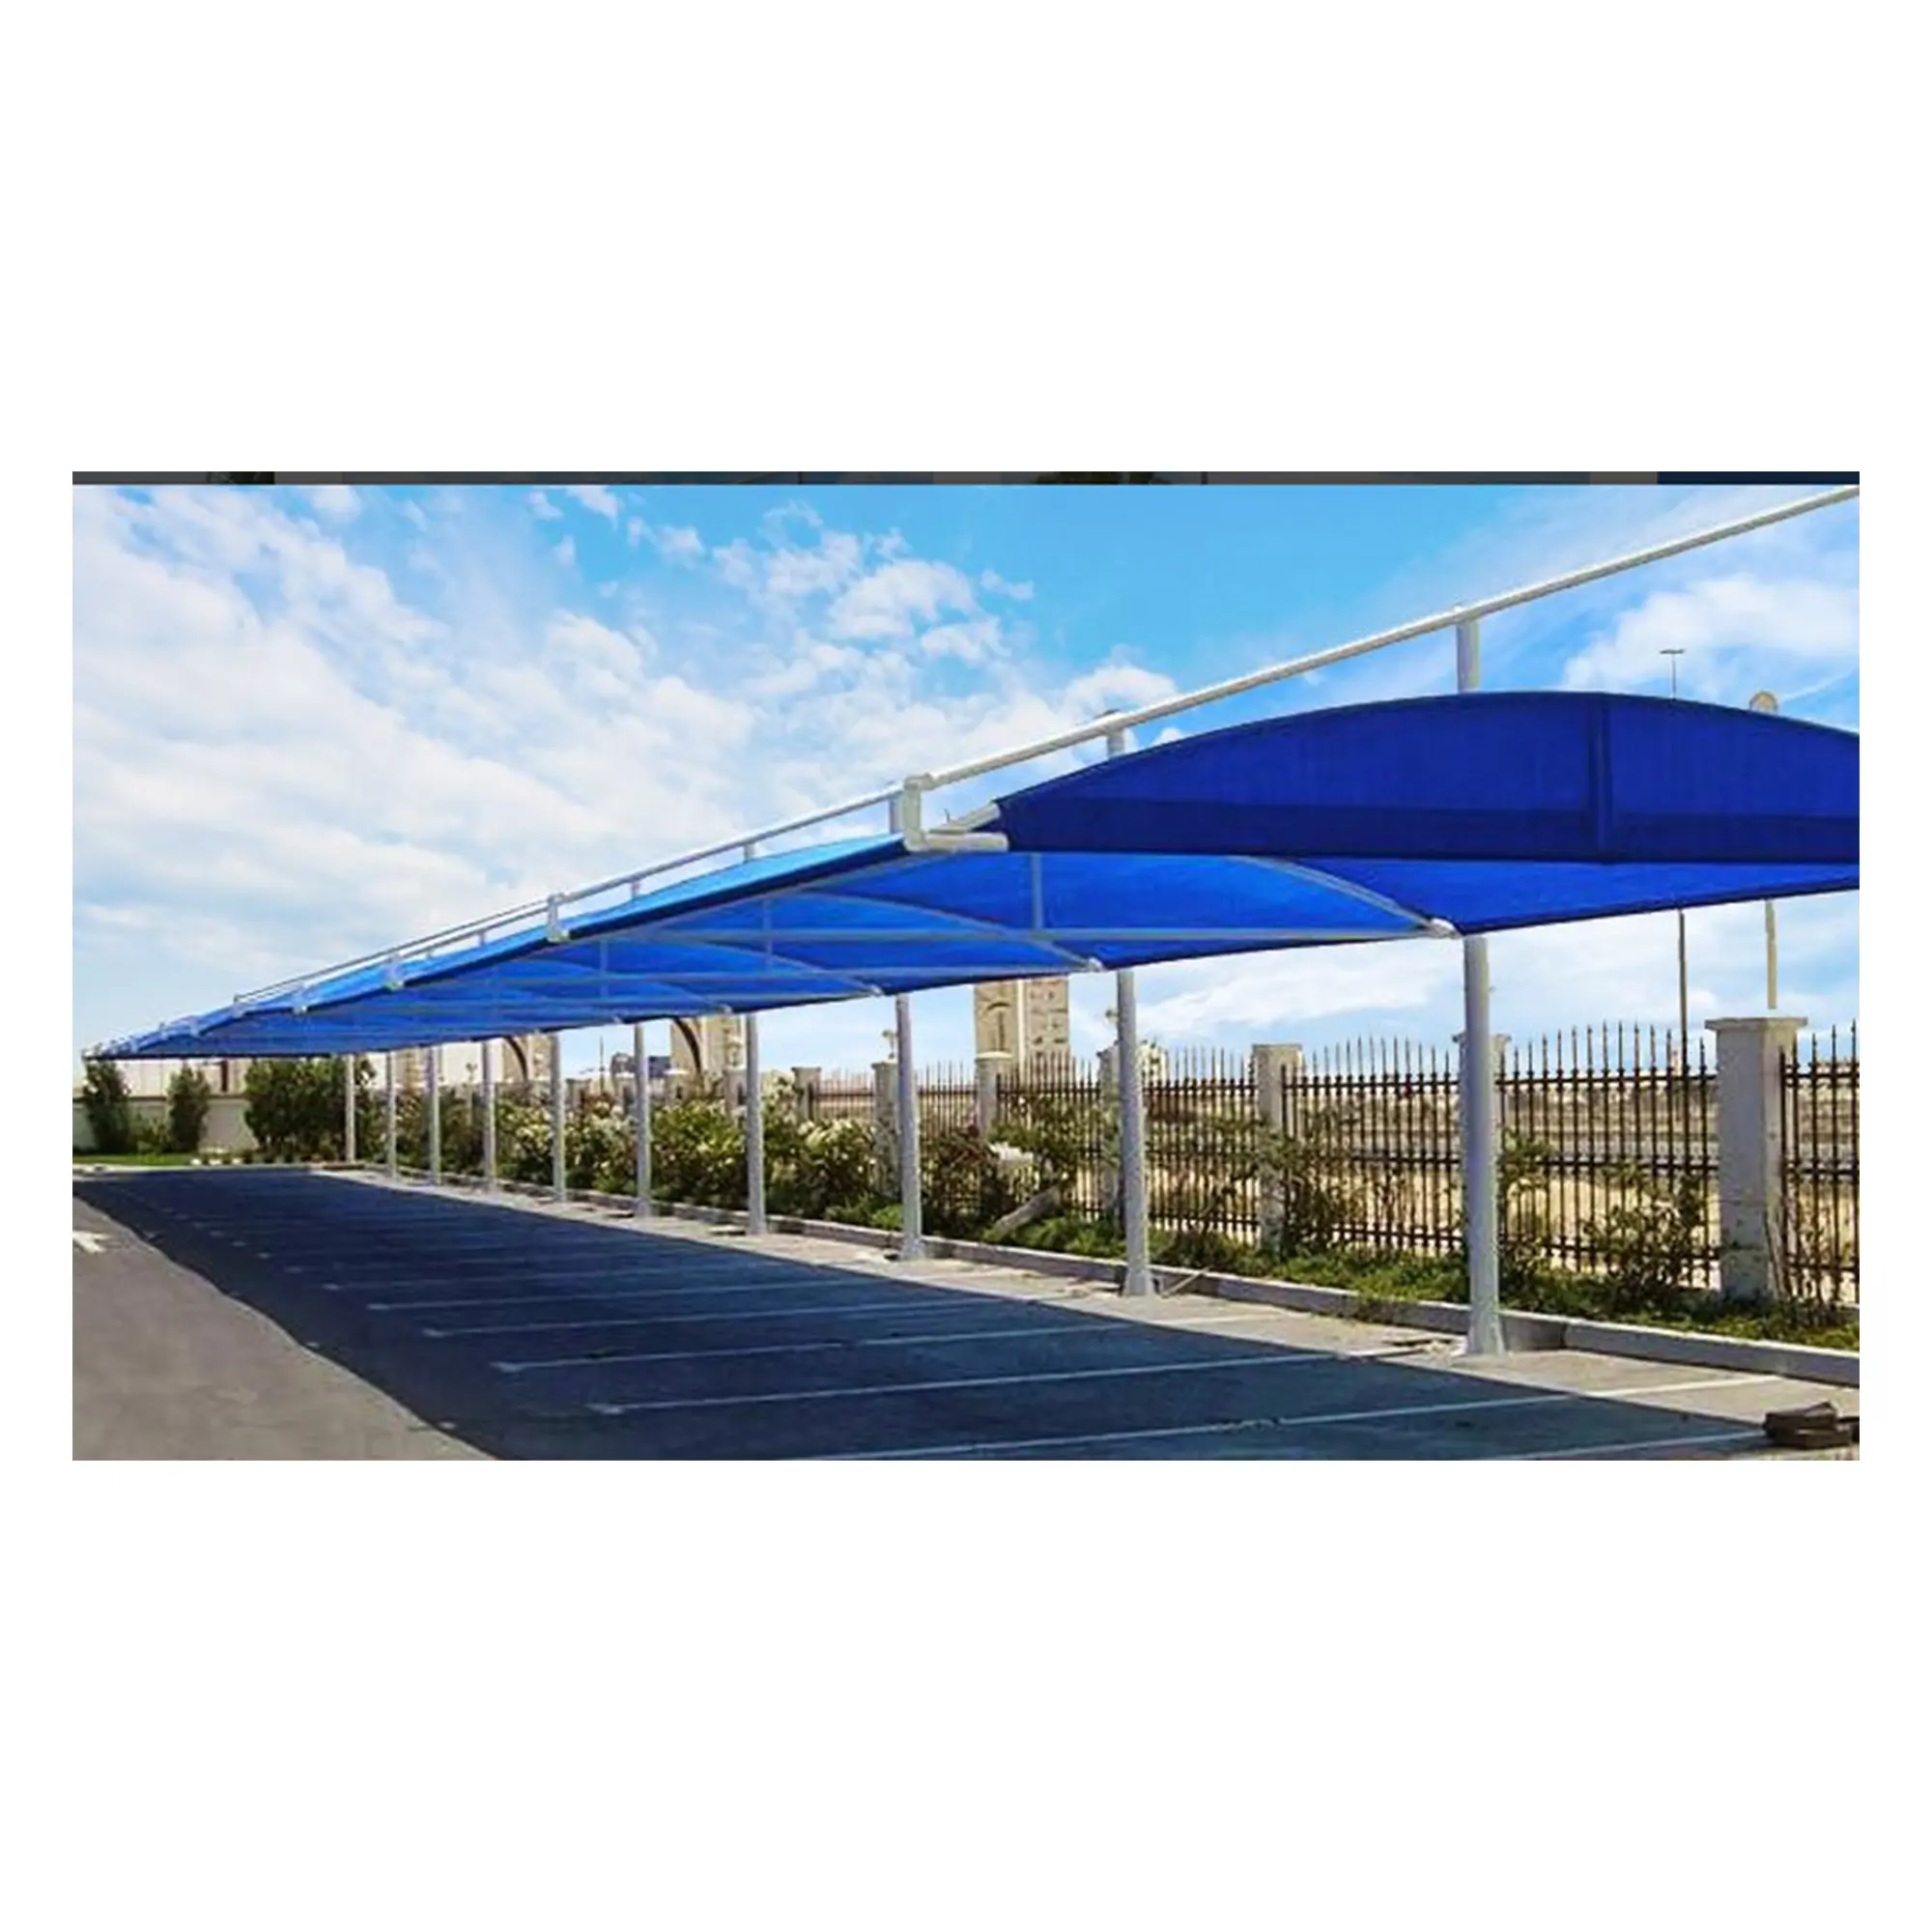 FAPTEX 1000F Fire Resistant Architectural PVC Coated Polyester Fabric 680GSM with PVDF and Acrylic Top Coat